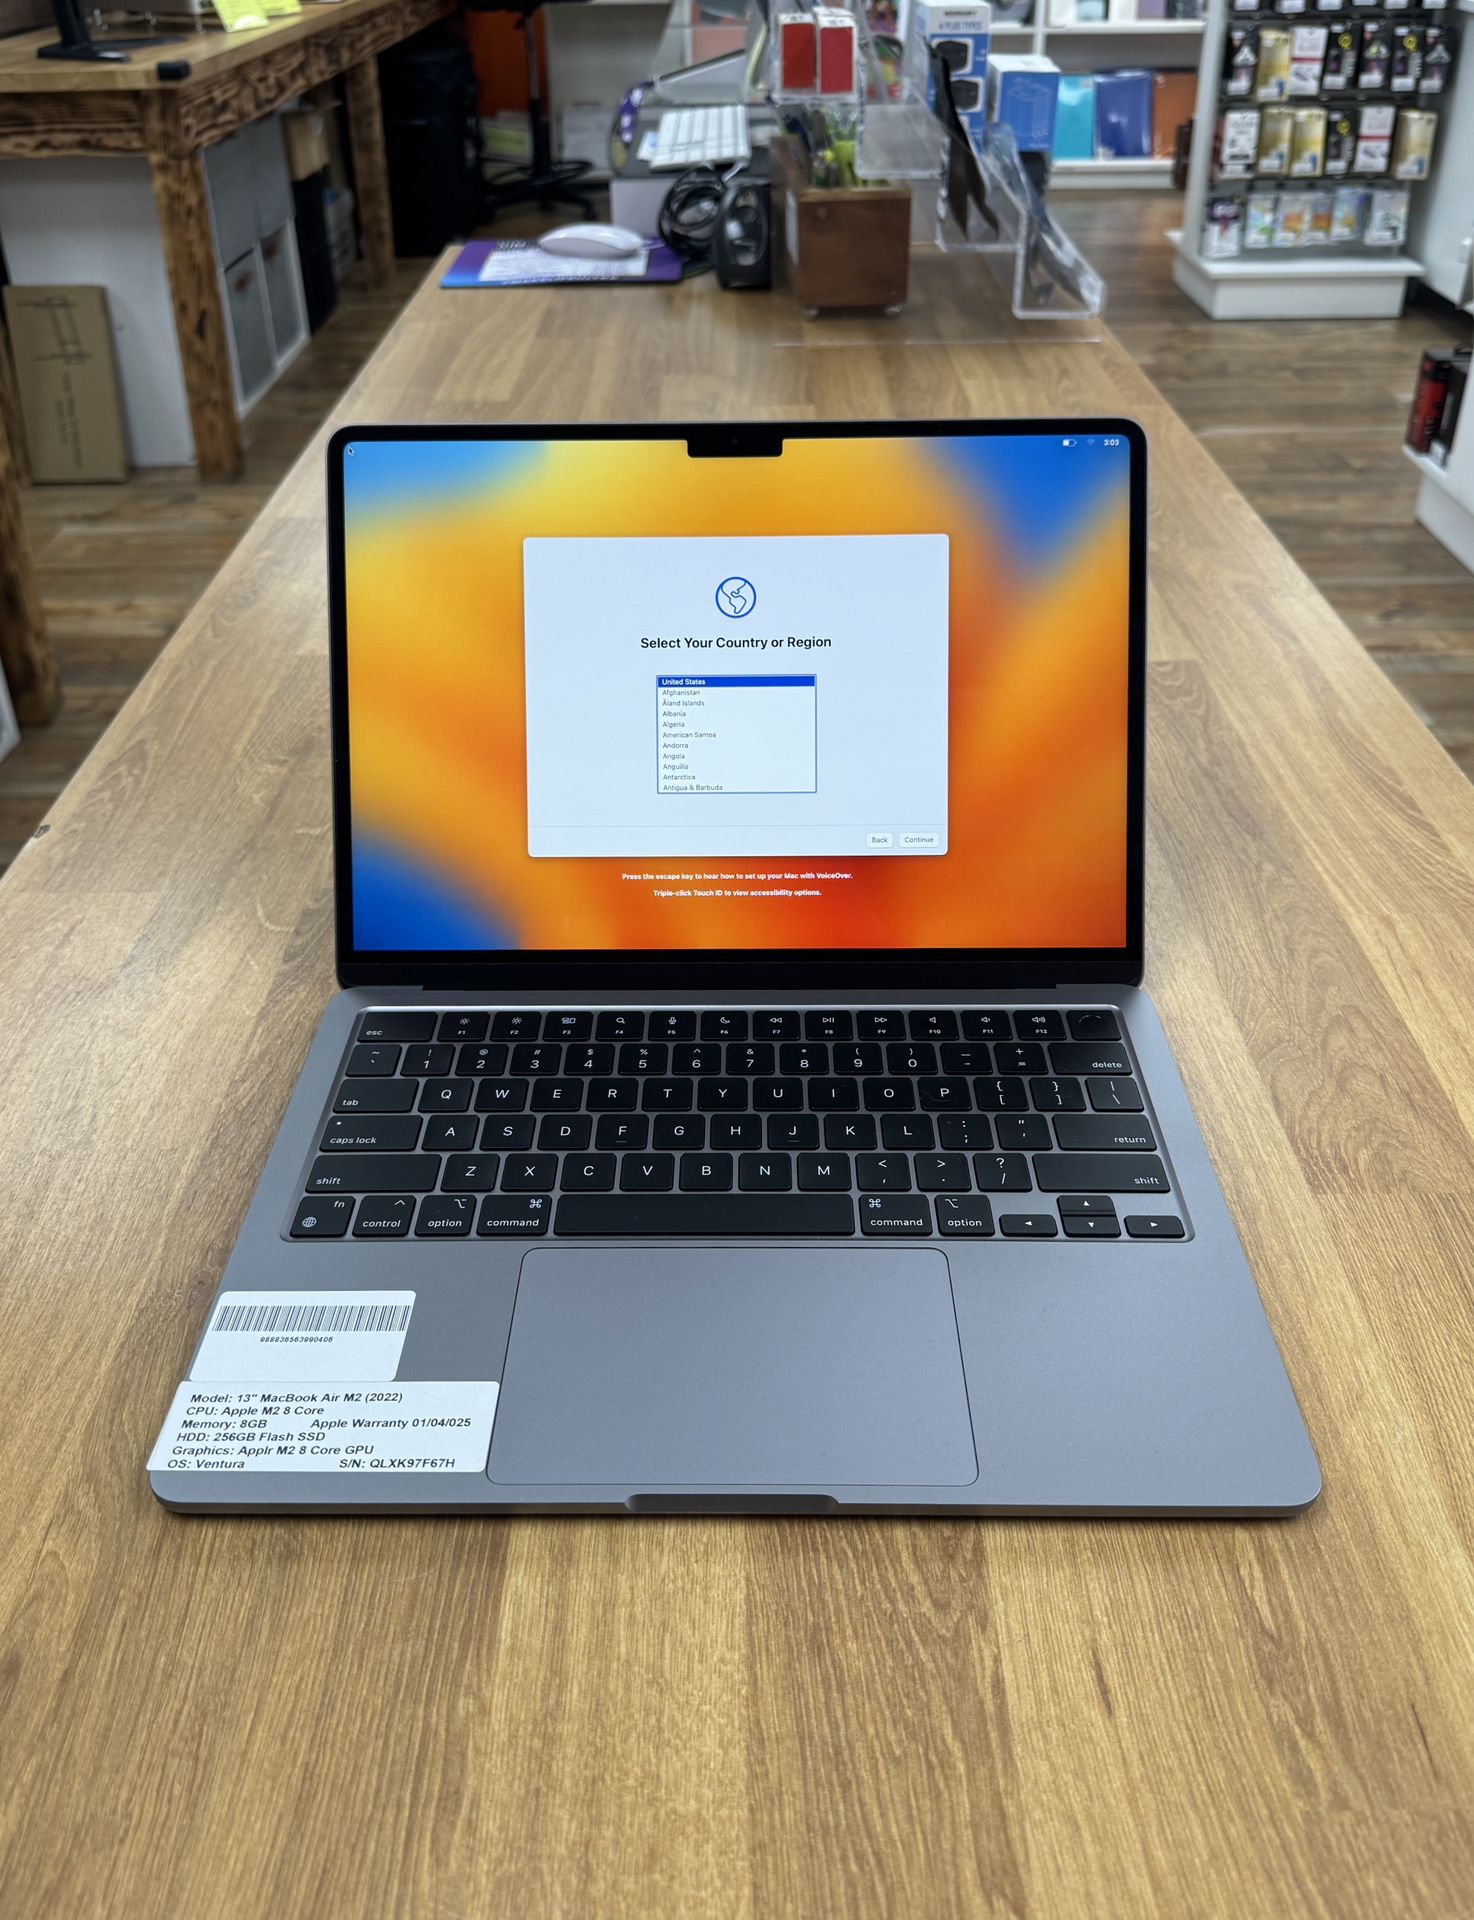 13" MacBook Air M2 8 Core * 256GB SSD * 8GB RAM * Financing Available 